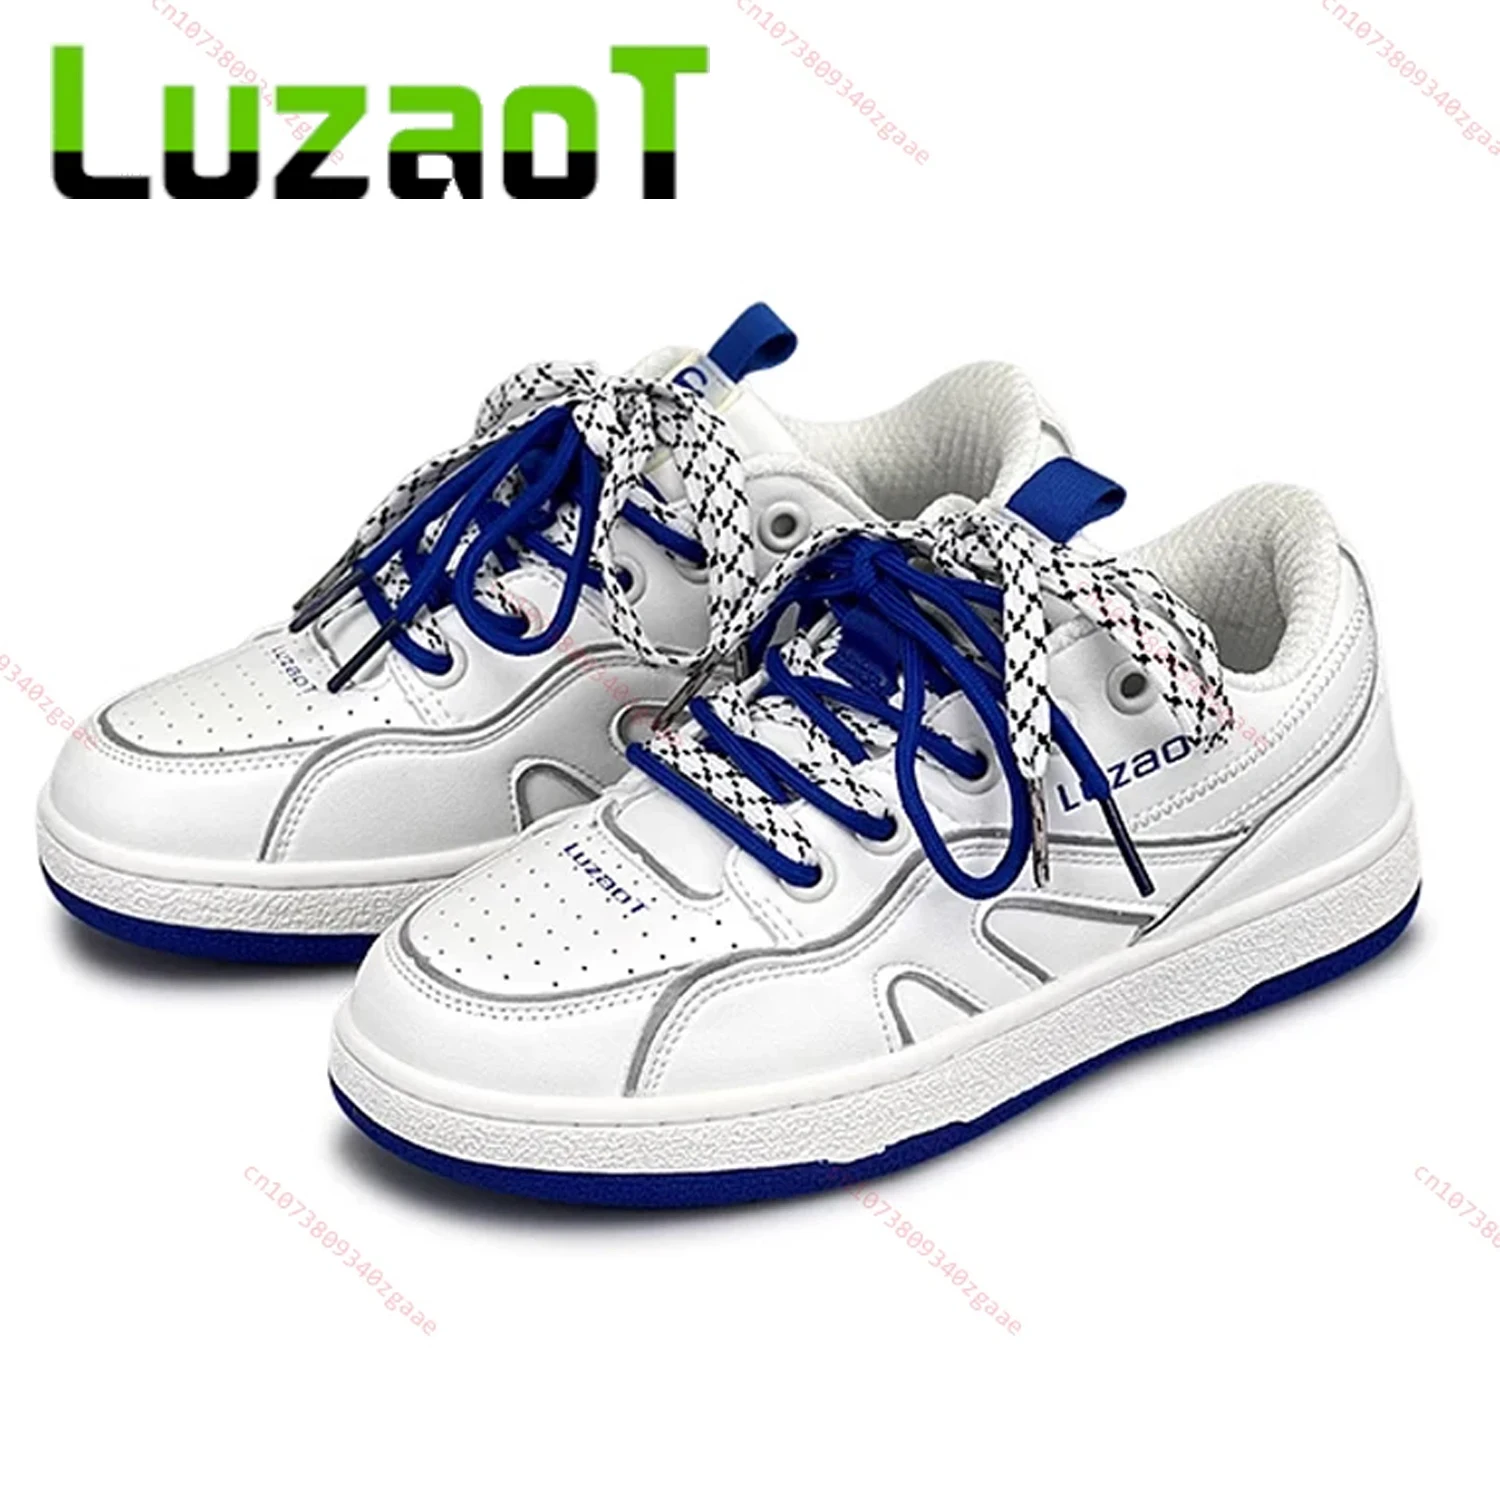 

LUZAOT White Skateboard Shoes Men and Women Leather Casual Y2k Sneakers Outdoor Classic Vintage Hip Hop Street Skate Shoes